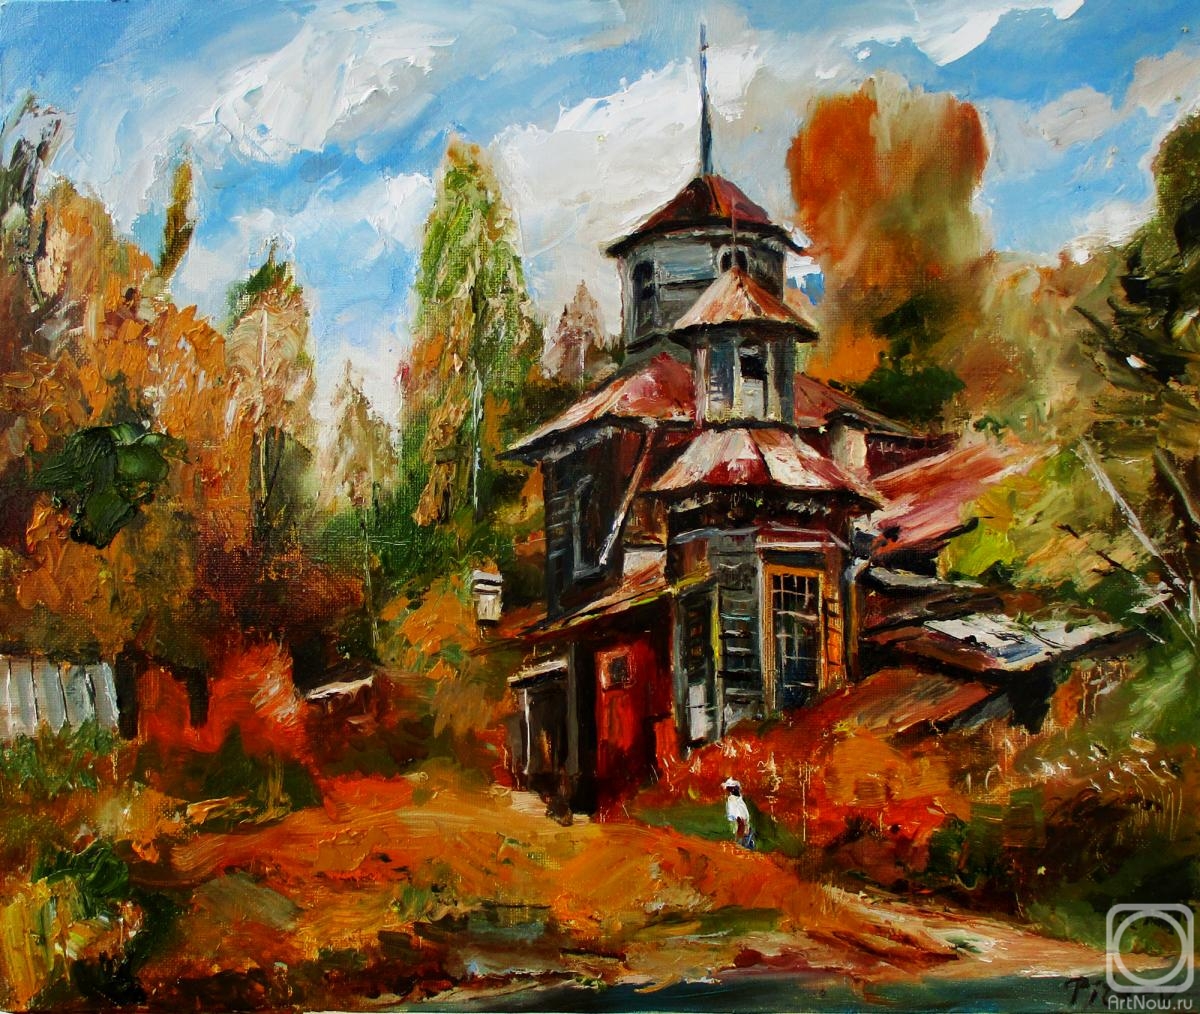 Pitaev Valery. The old Lutheran Church